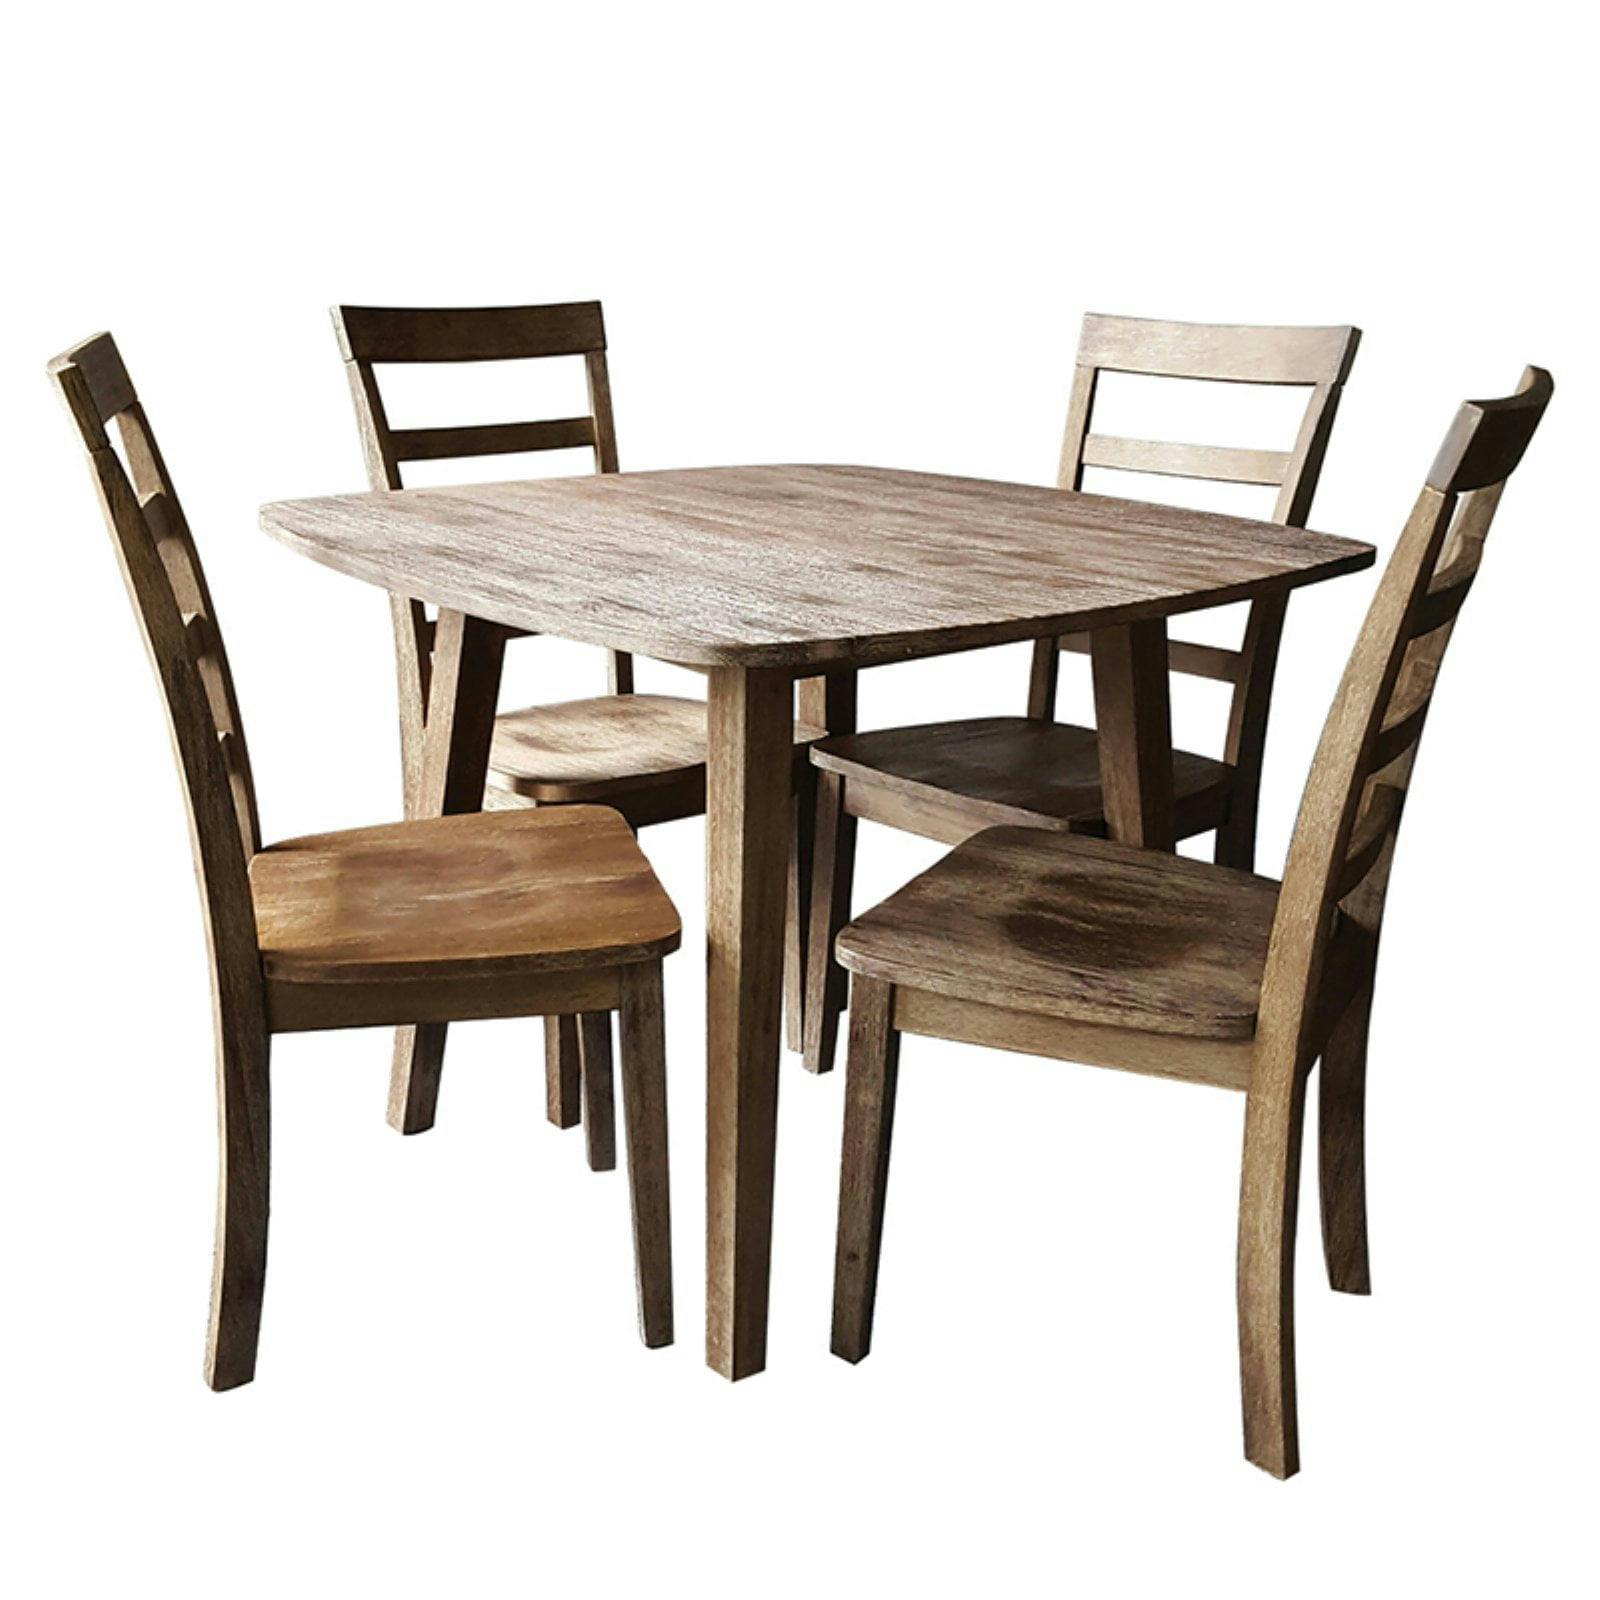 Barnwood Wire-Brush Compact 5-Piece Dining Set with Ladderback Chairs